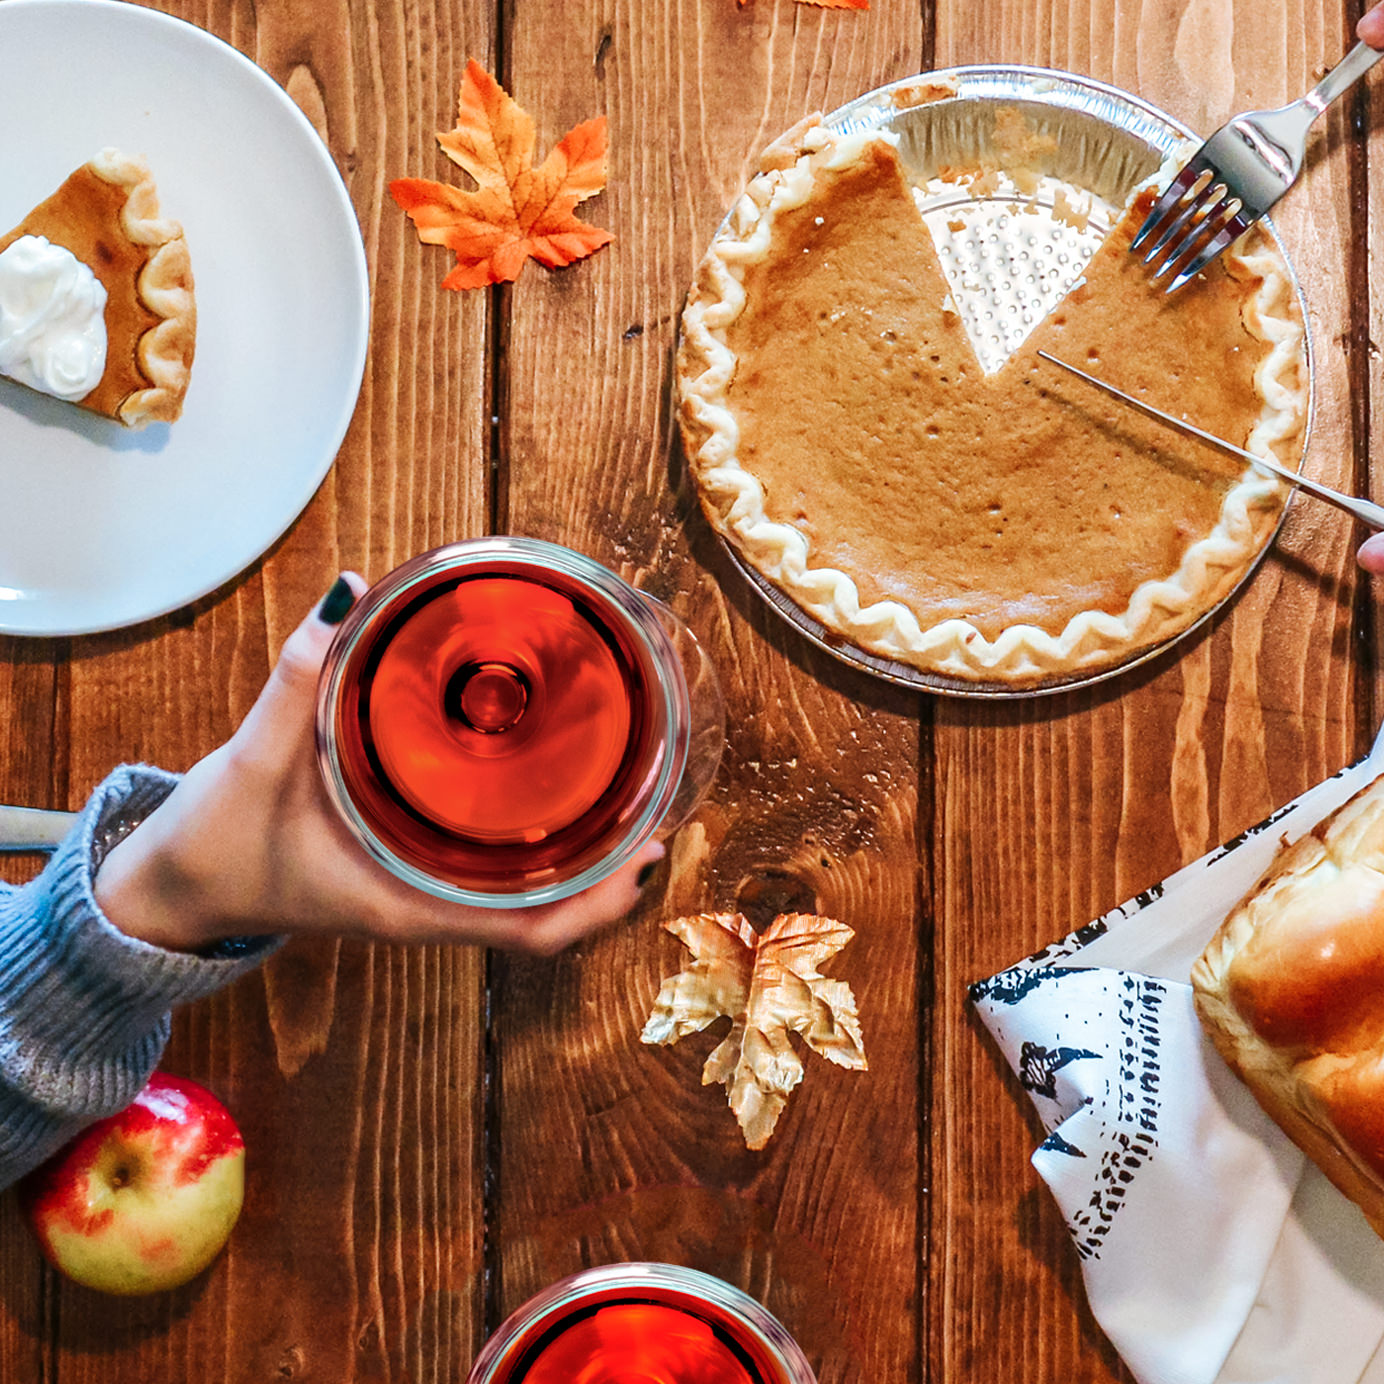 How Friendsgiving Became an Almost-Official Holiday